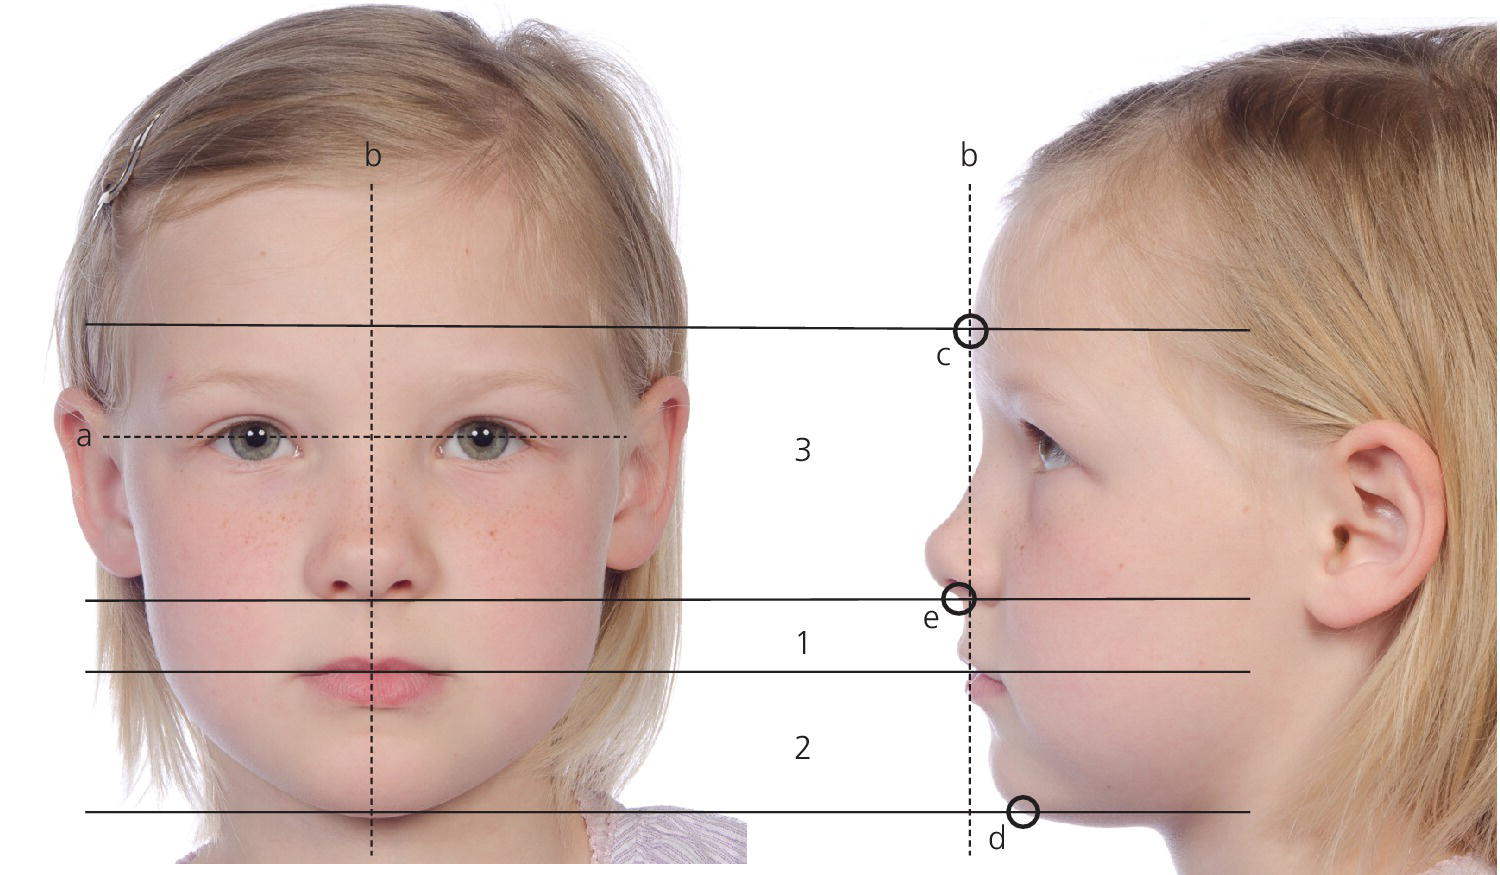 Photos displaying frontal (left) and side views (right) of the same girl with lines drawn labeled a, b, c, d and e at her face depicting assessment of the facial symmetry and proportions.